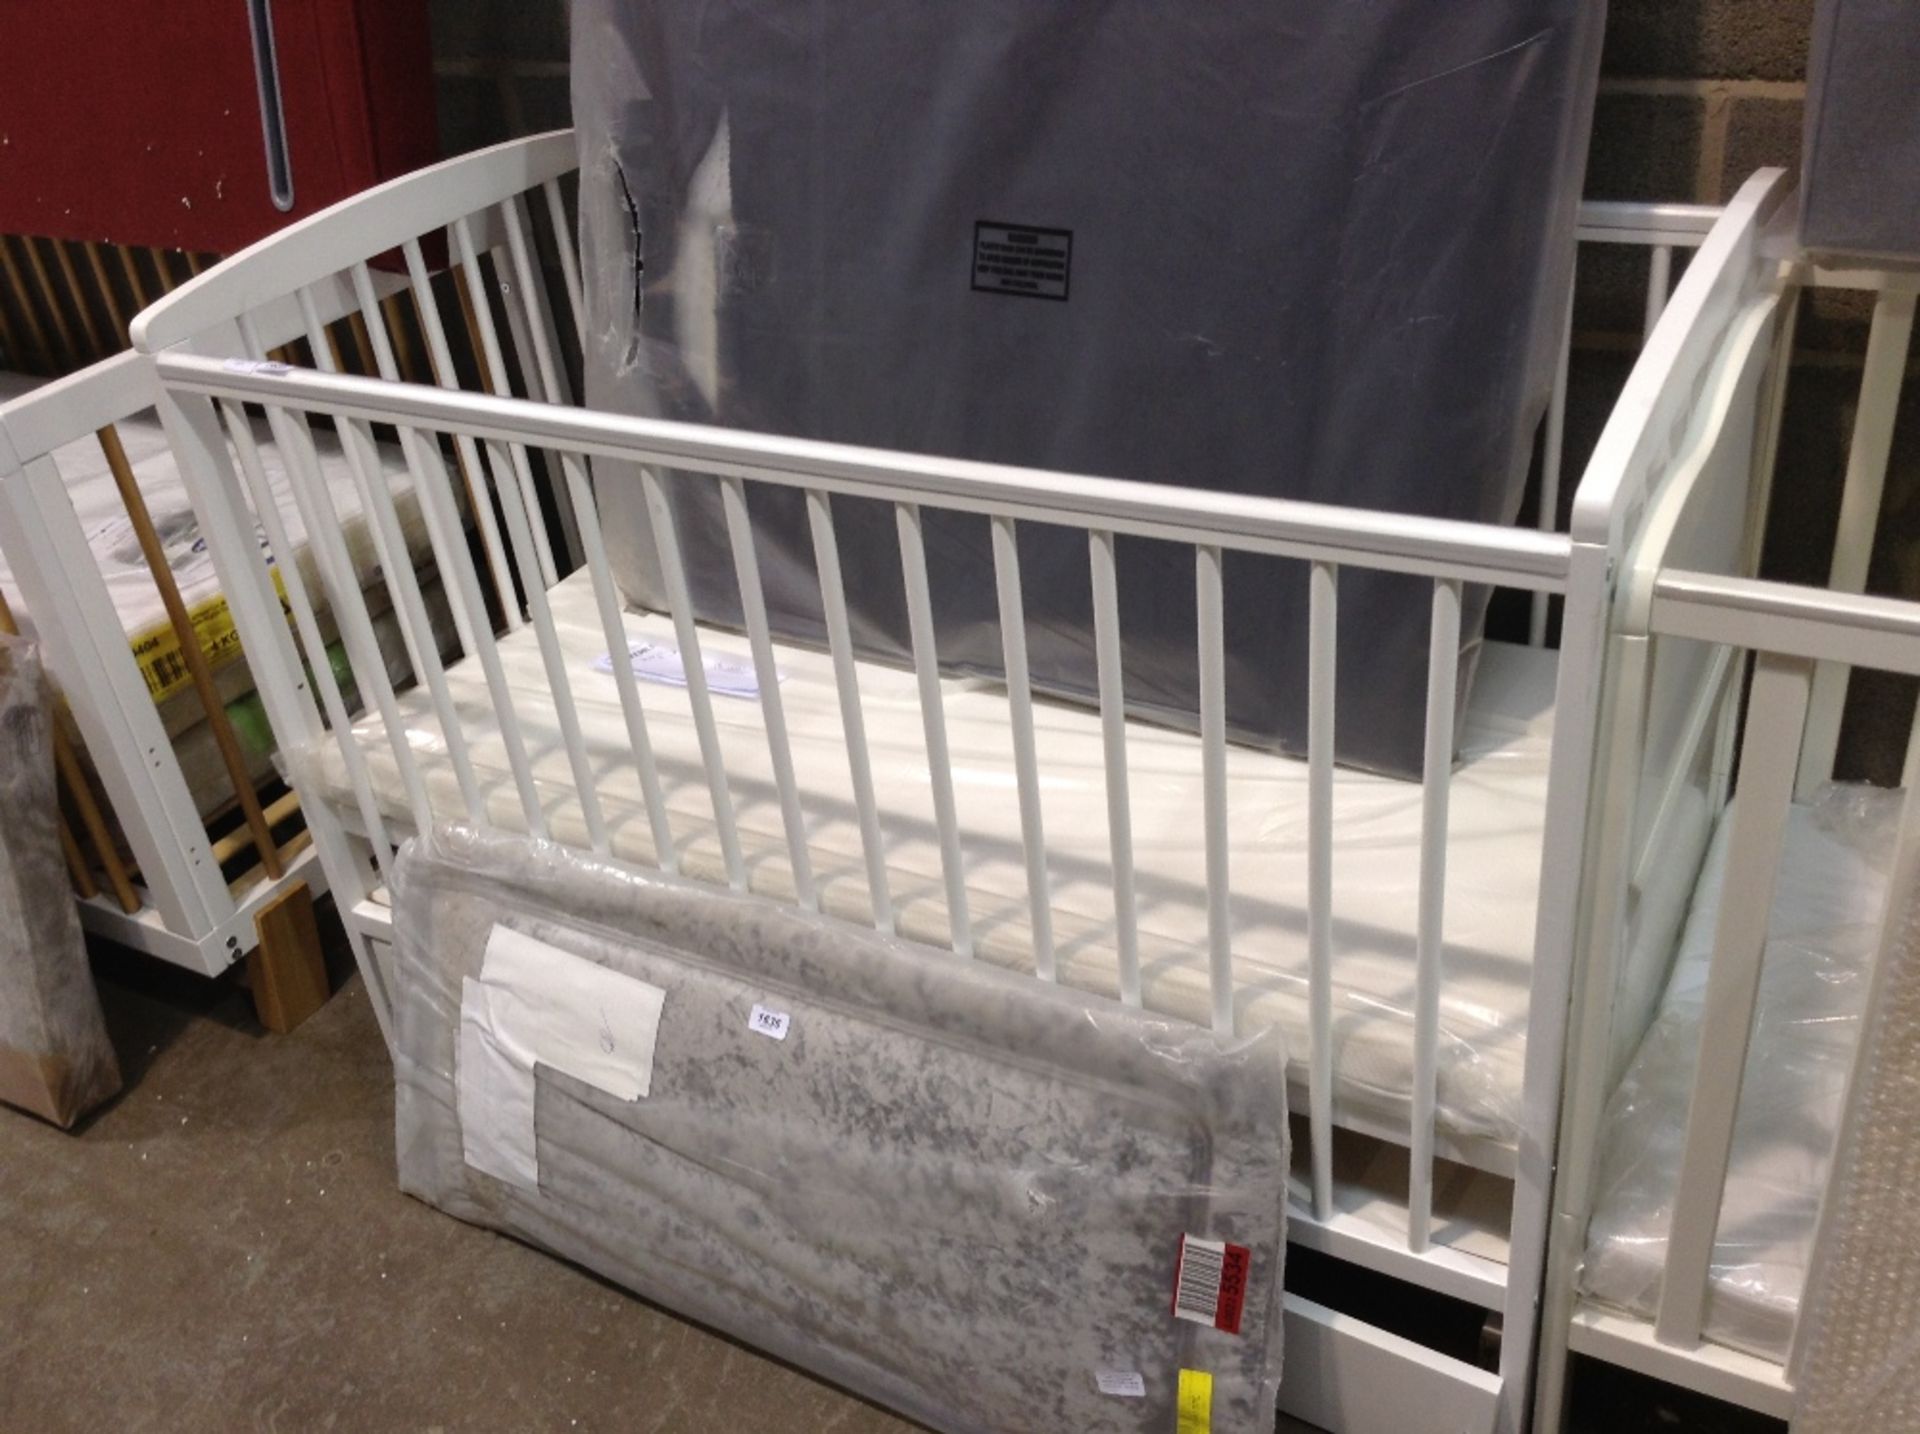 Harriet Bee, Michael Cot Bed with Mattress (HEAVY DAMAGE) RRP £145.99 (FRIG3462 - 18184/3)